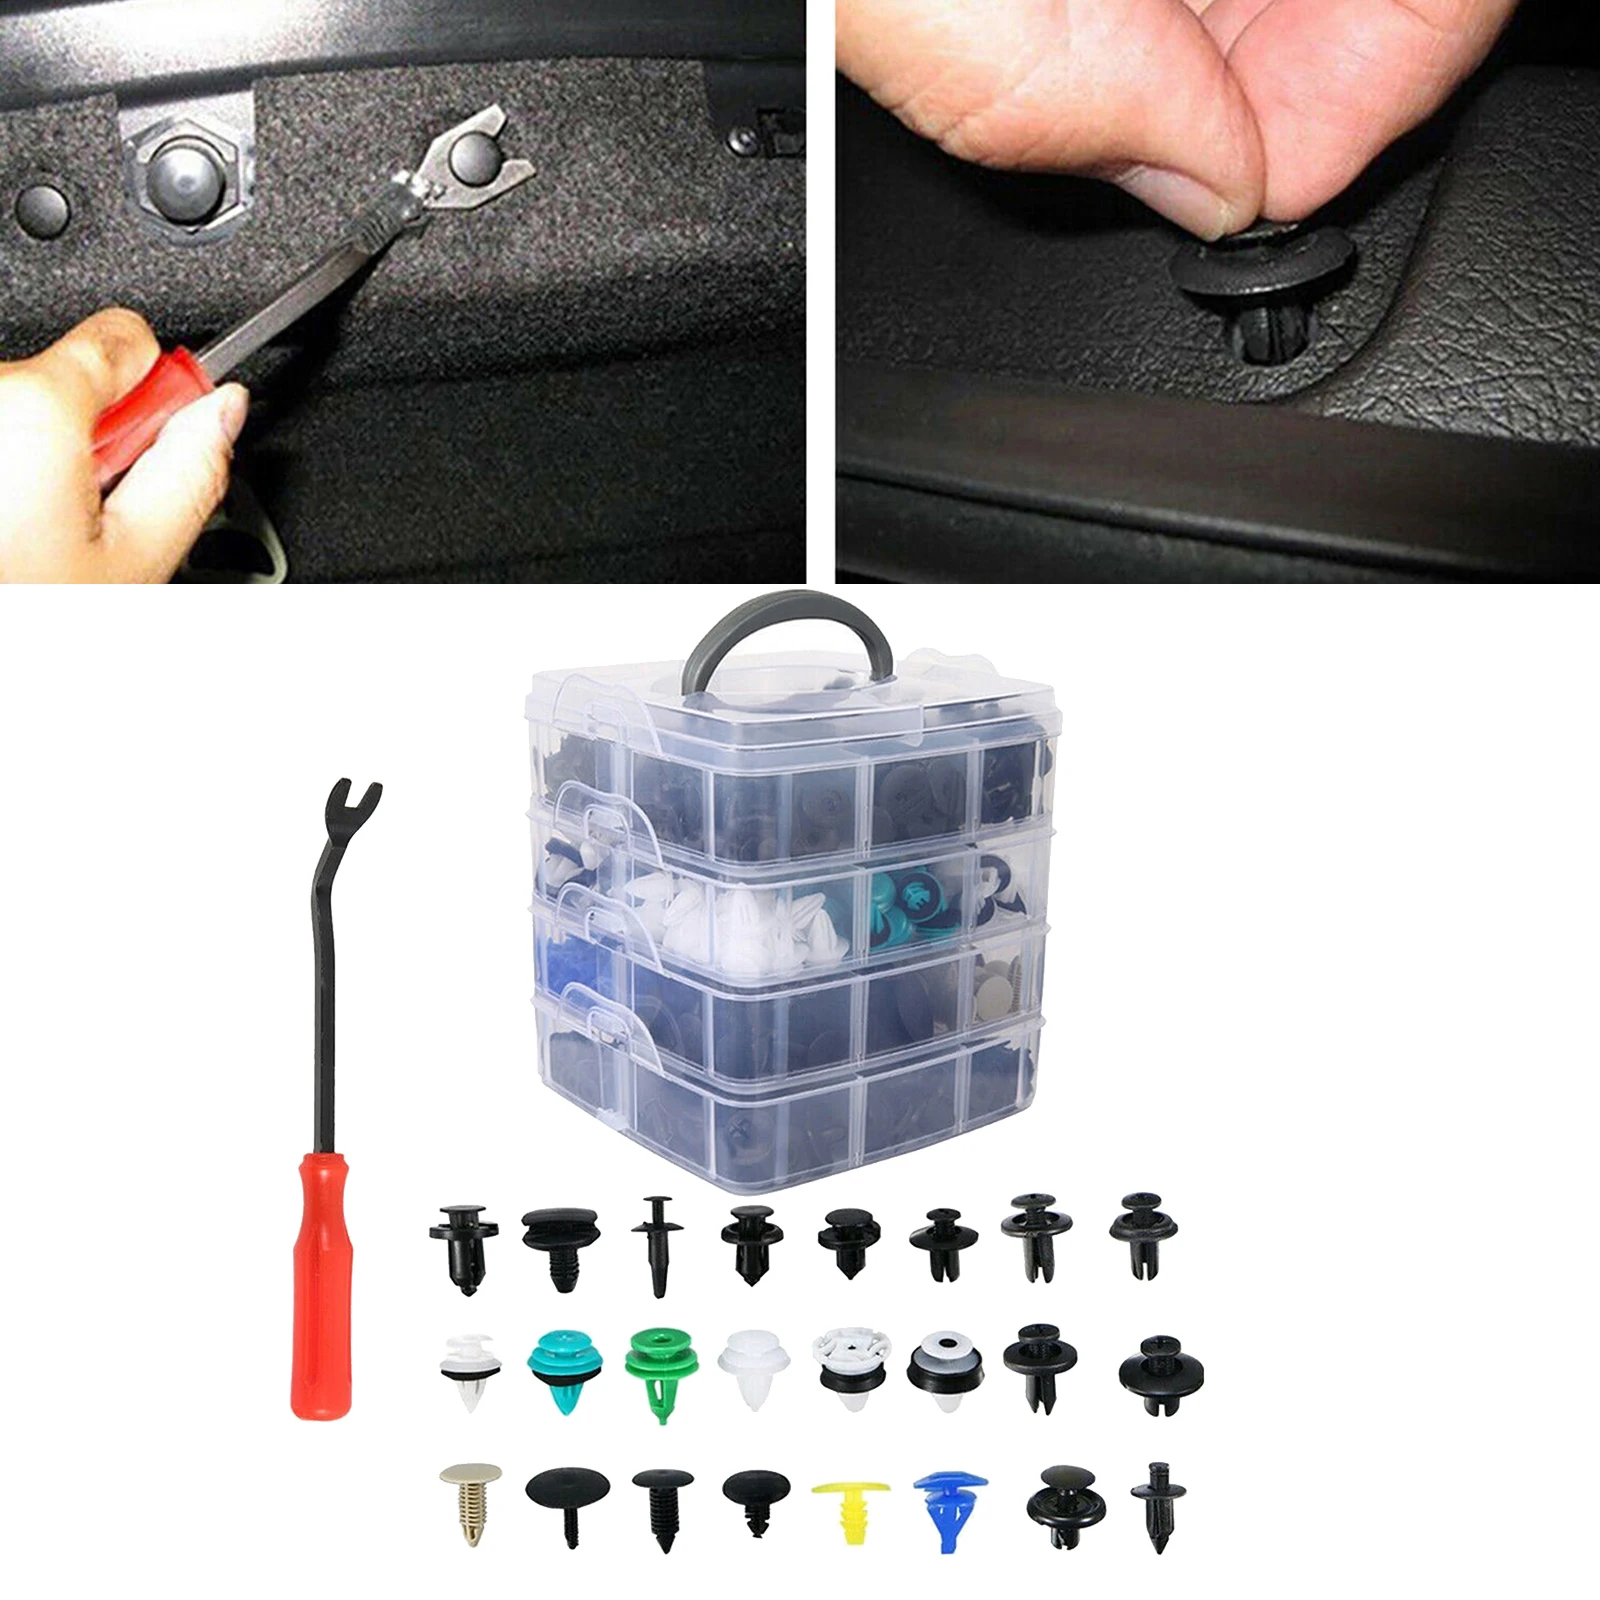 620x Boxed Car Plastic Retainer Clips Rivets Fasteners Assorted Bumper Clip Repair Parts Liner Clips Kit Common Sizes